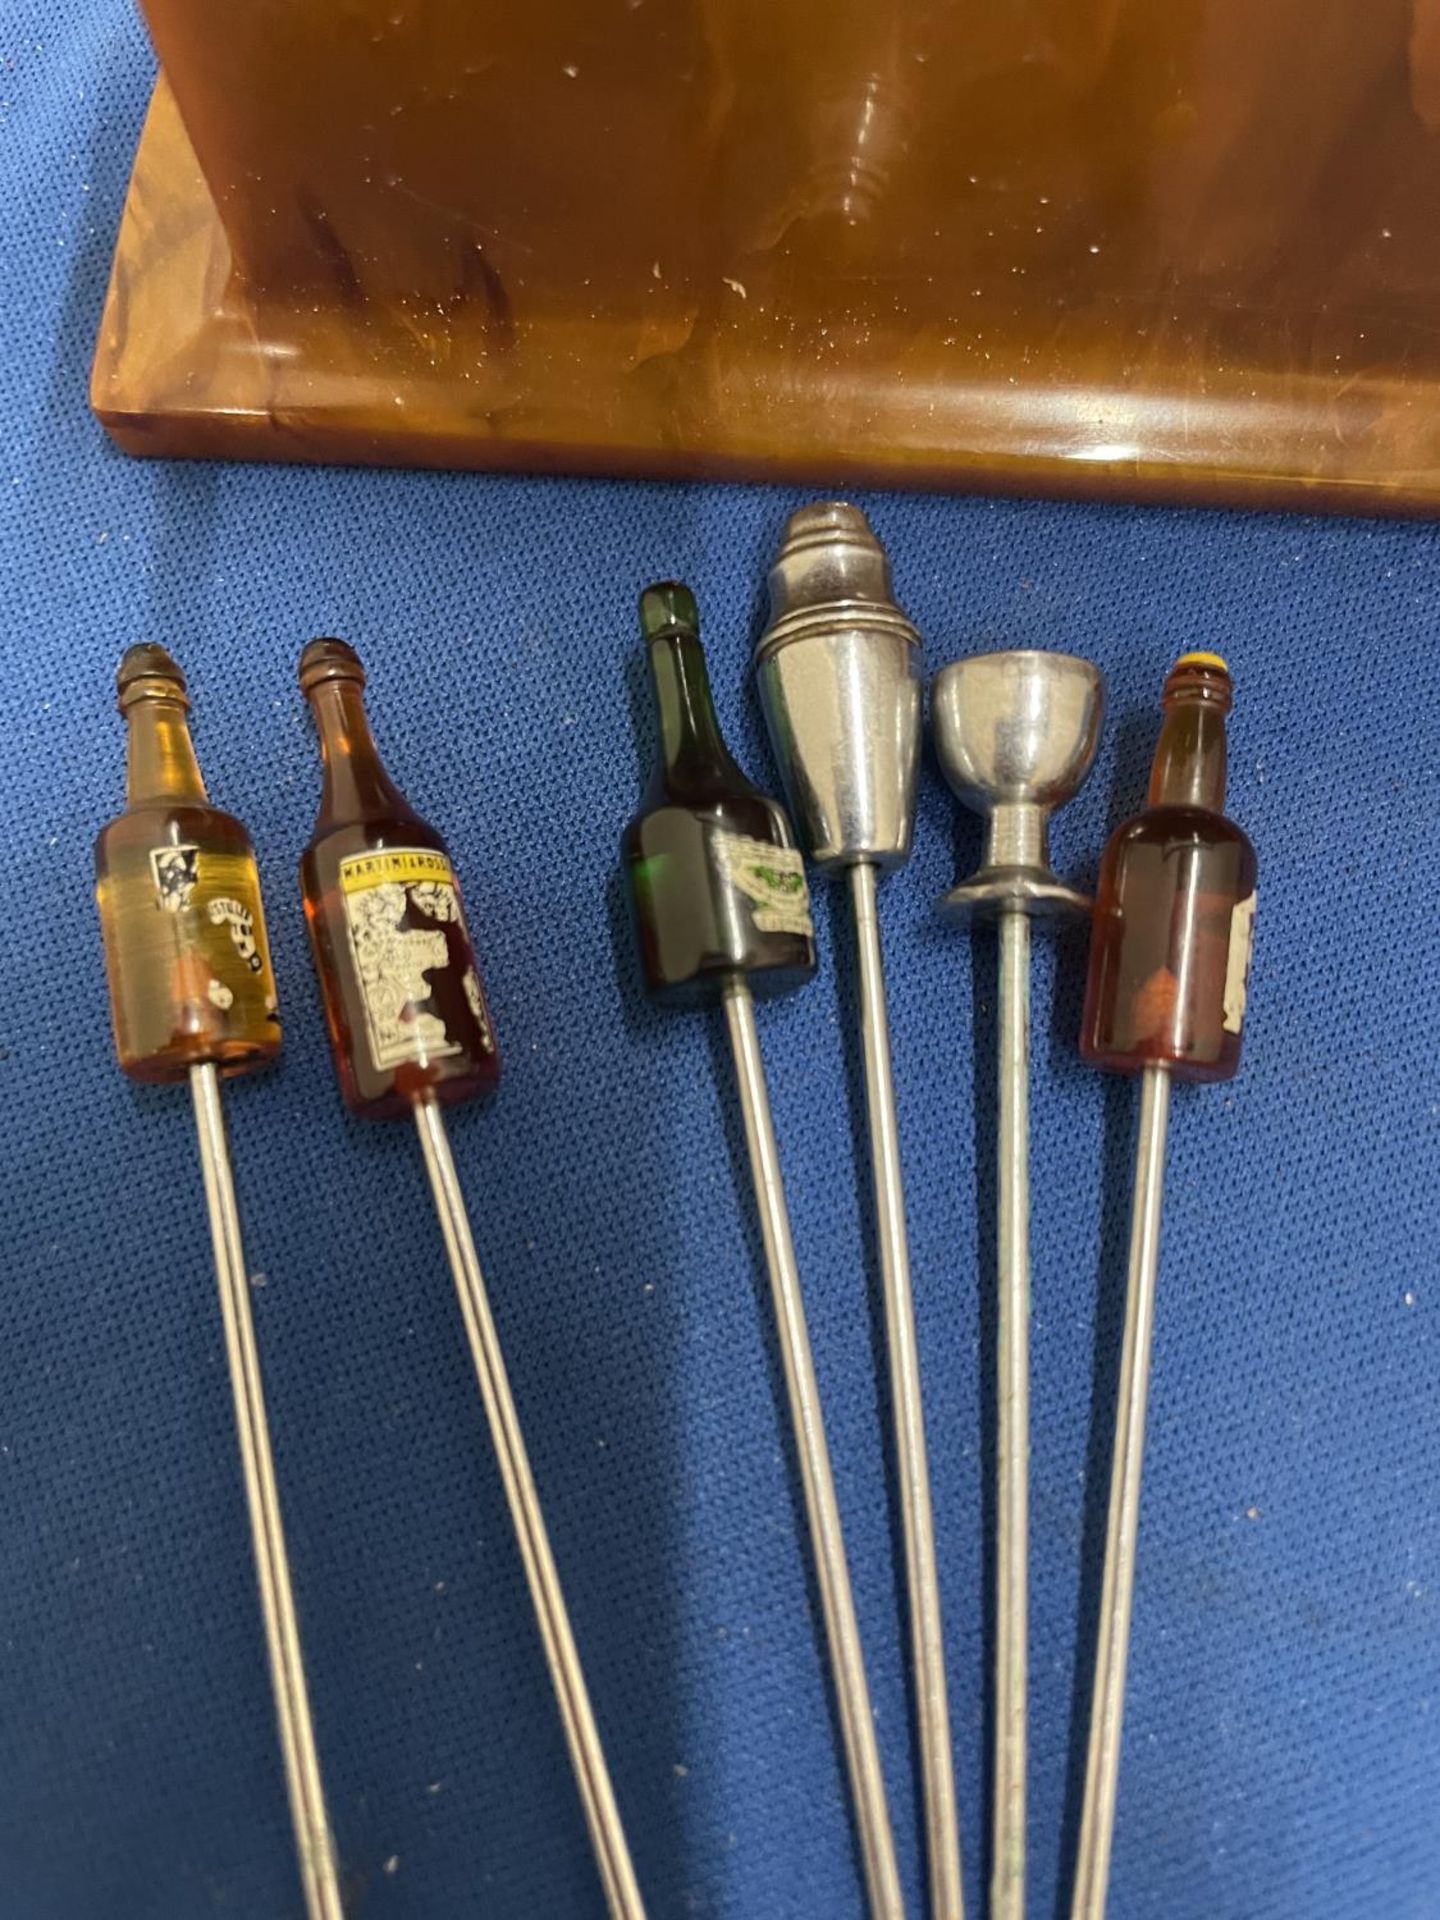 TWO VINTAGE ITEMS TO INCLUDE BOXED CARVING SET AND A BAR CONTAINING NOVELTY COCKTAIL STICKS - Image 8 of 8